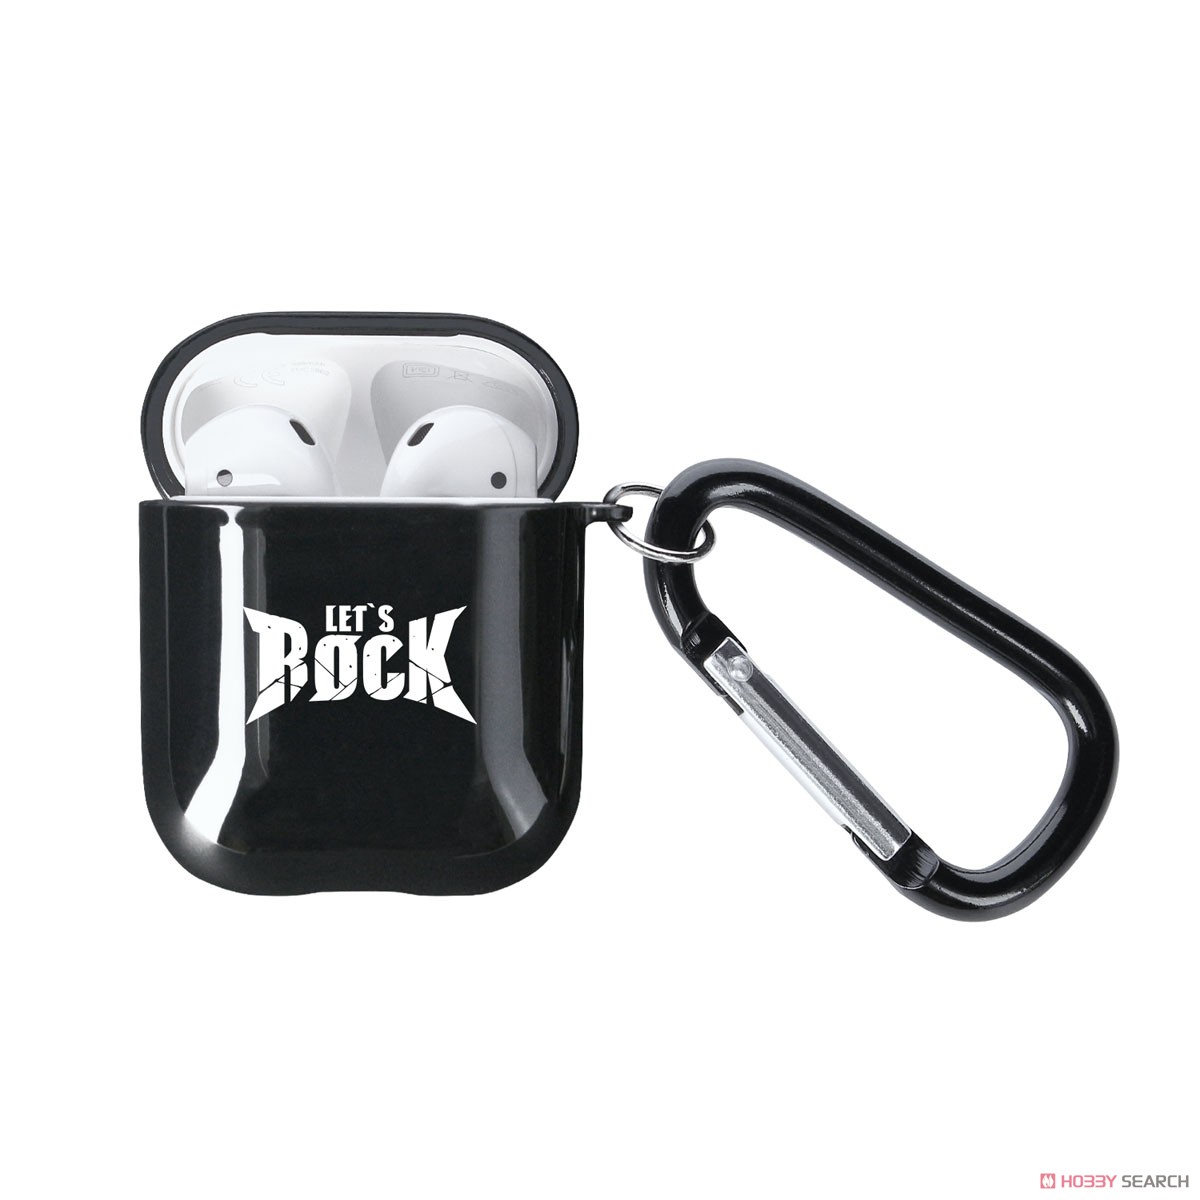 GUILTY GEAR -STRIVE- LET`S ROCK＆SLASH！ AirPodsケース(対応機種/AirPods Pro) (キャラクターグッズ) その他の画像1